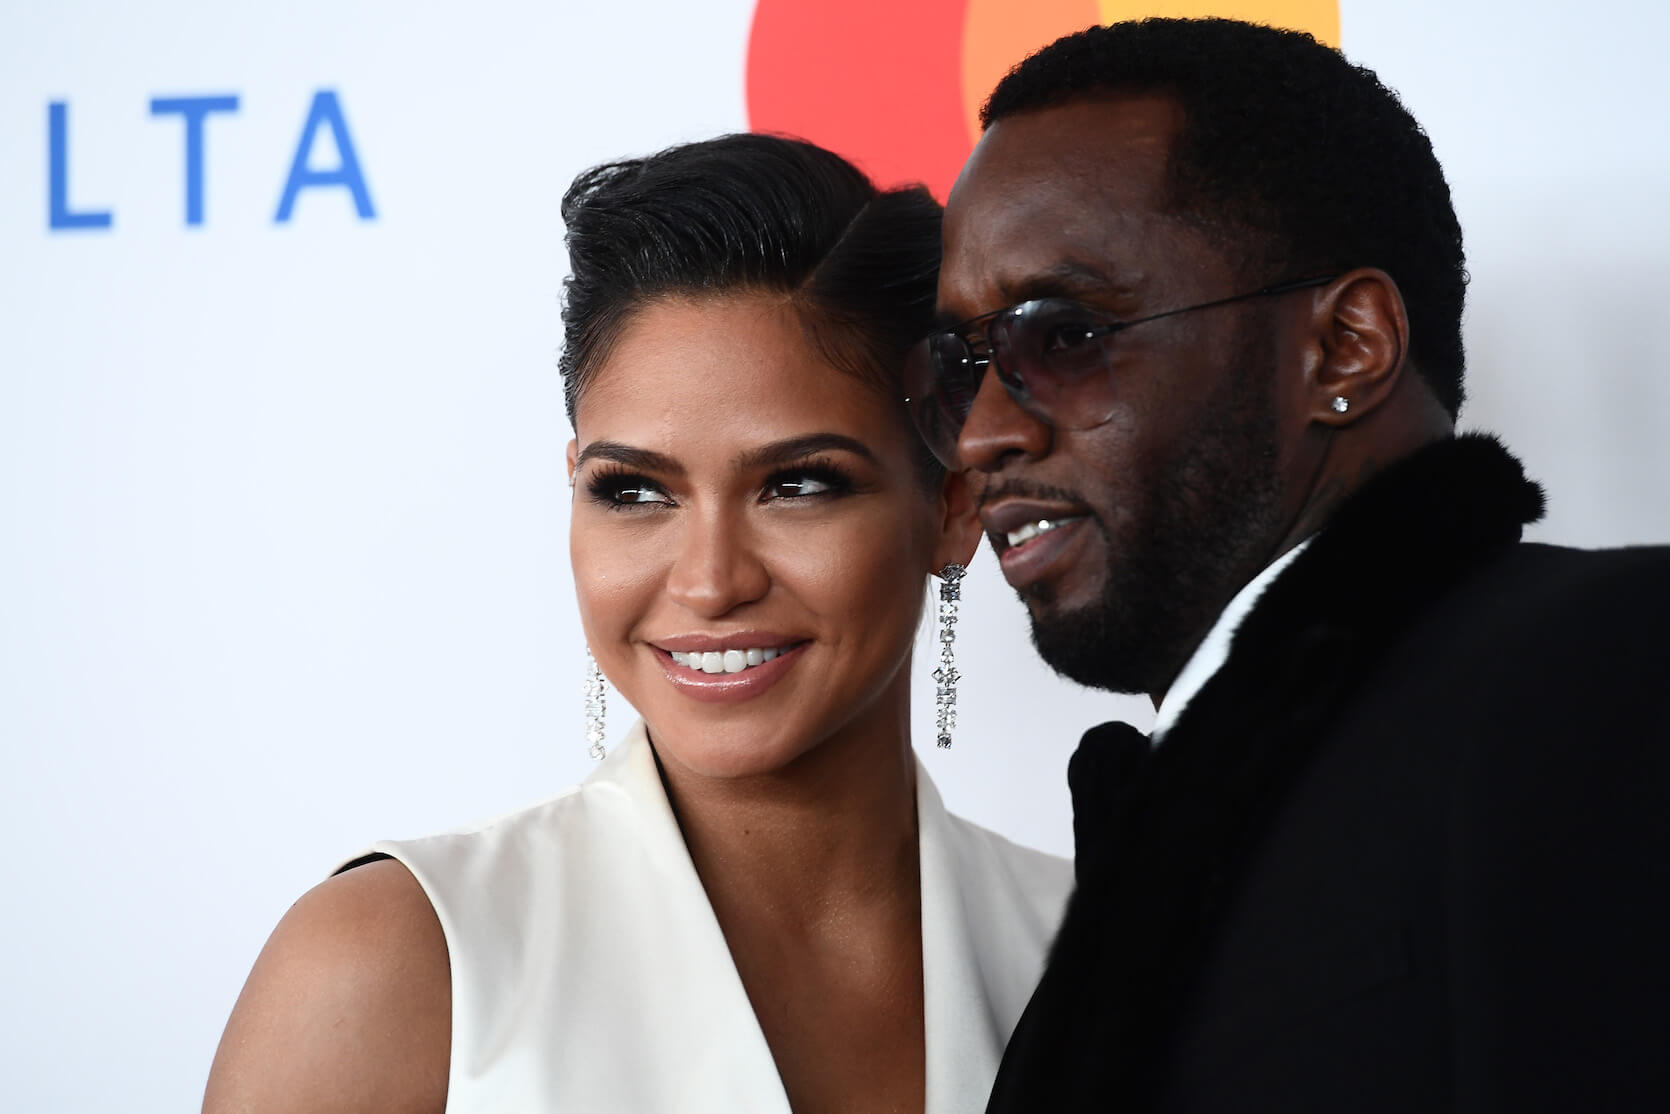 A close-up of Cassie Ventura and Sean 'P. Diddy' Combs smiling with their heads next to each other